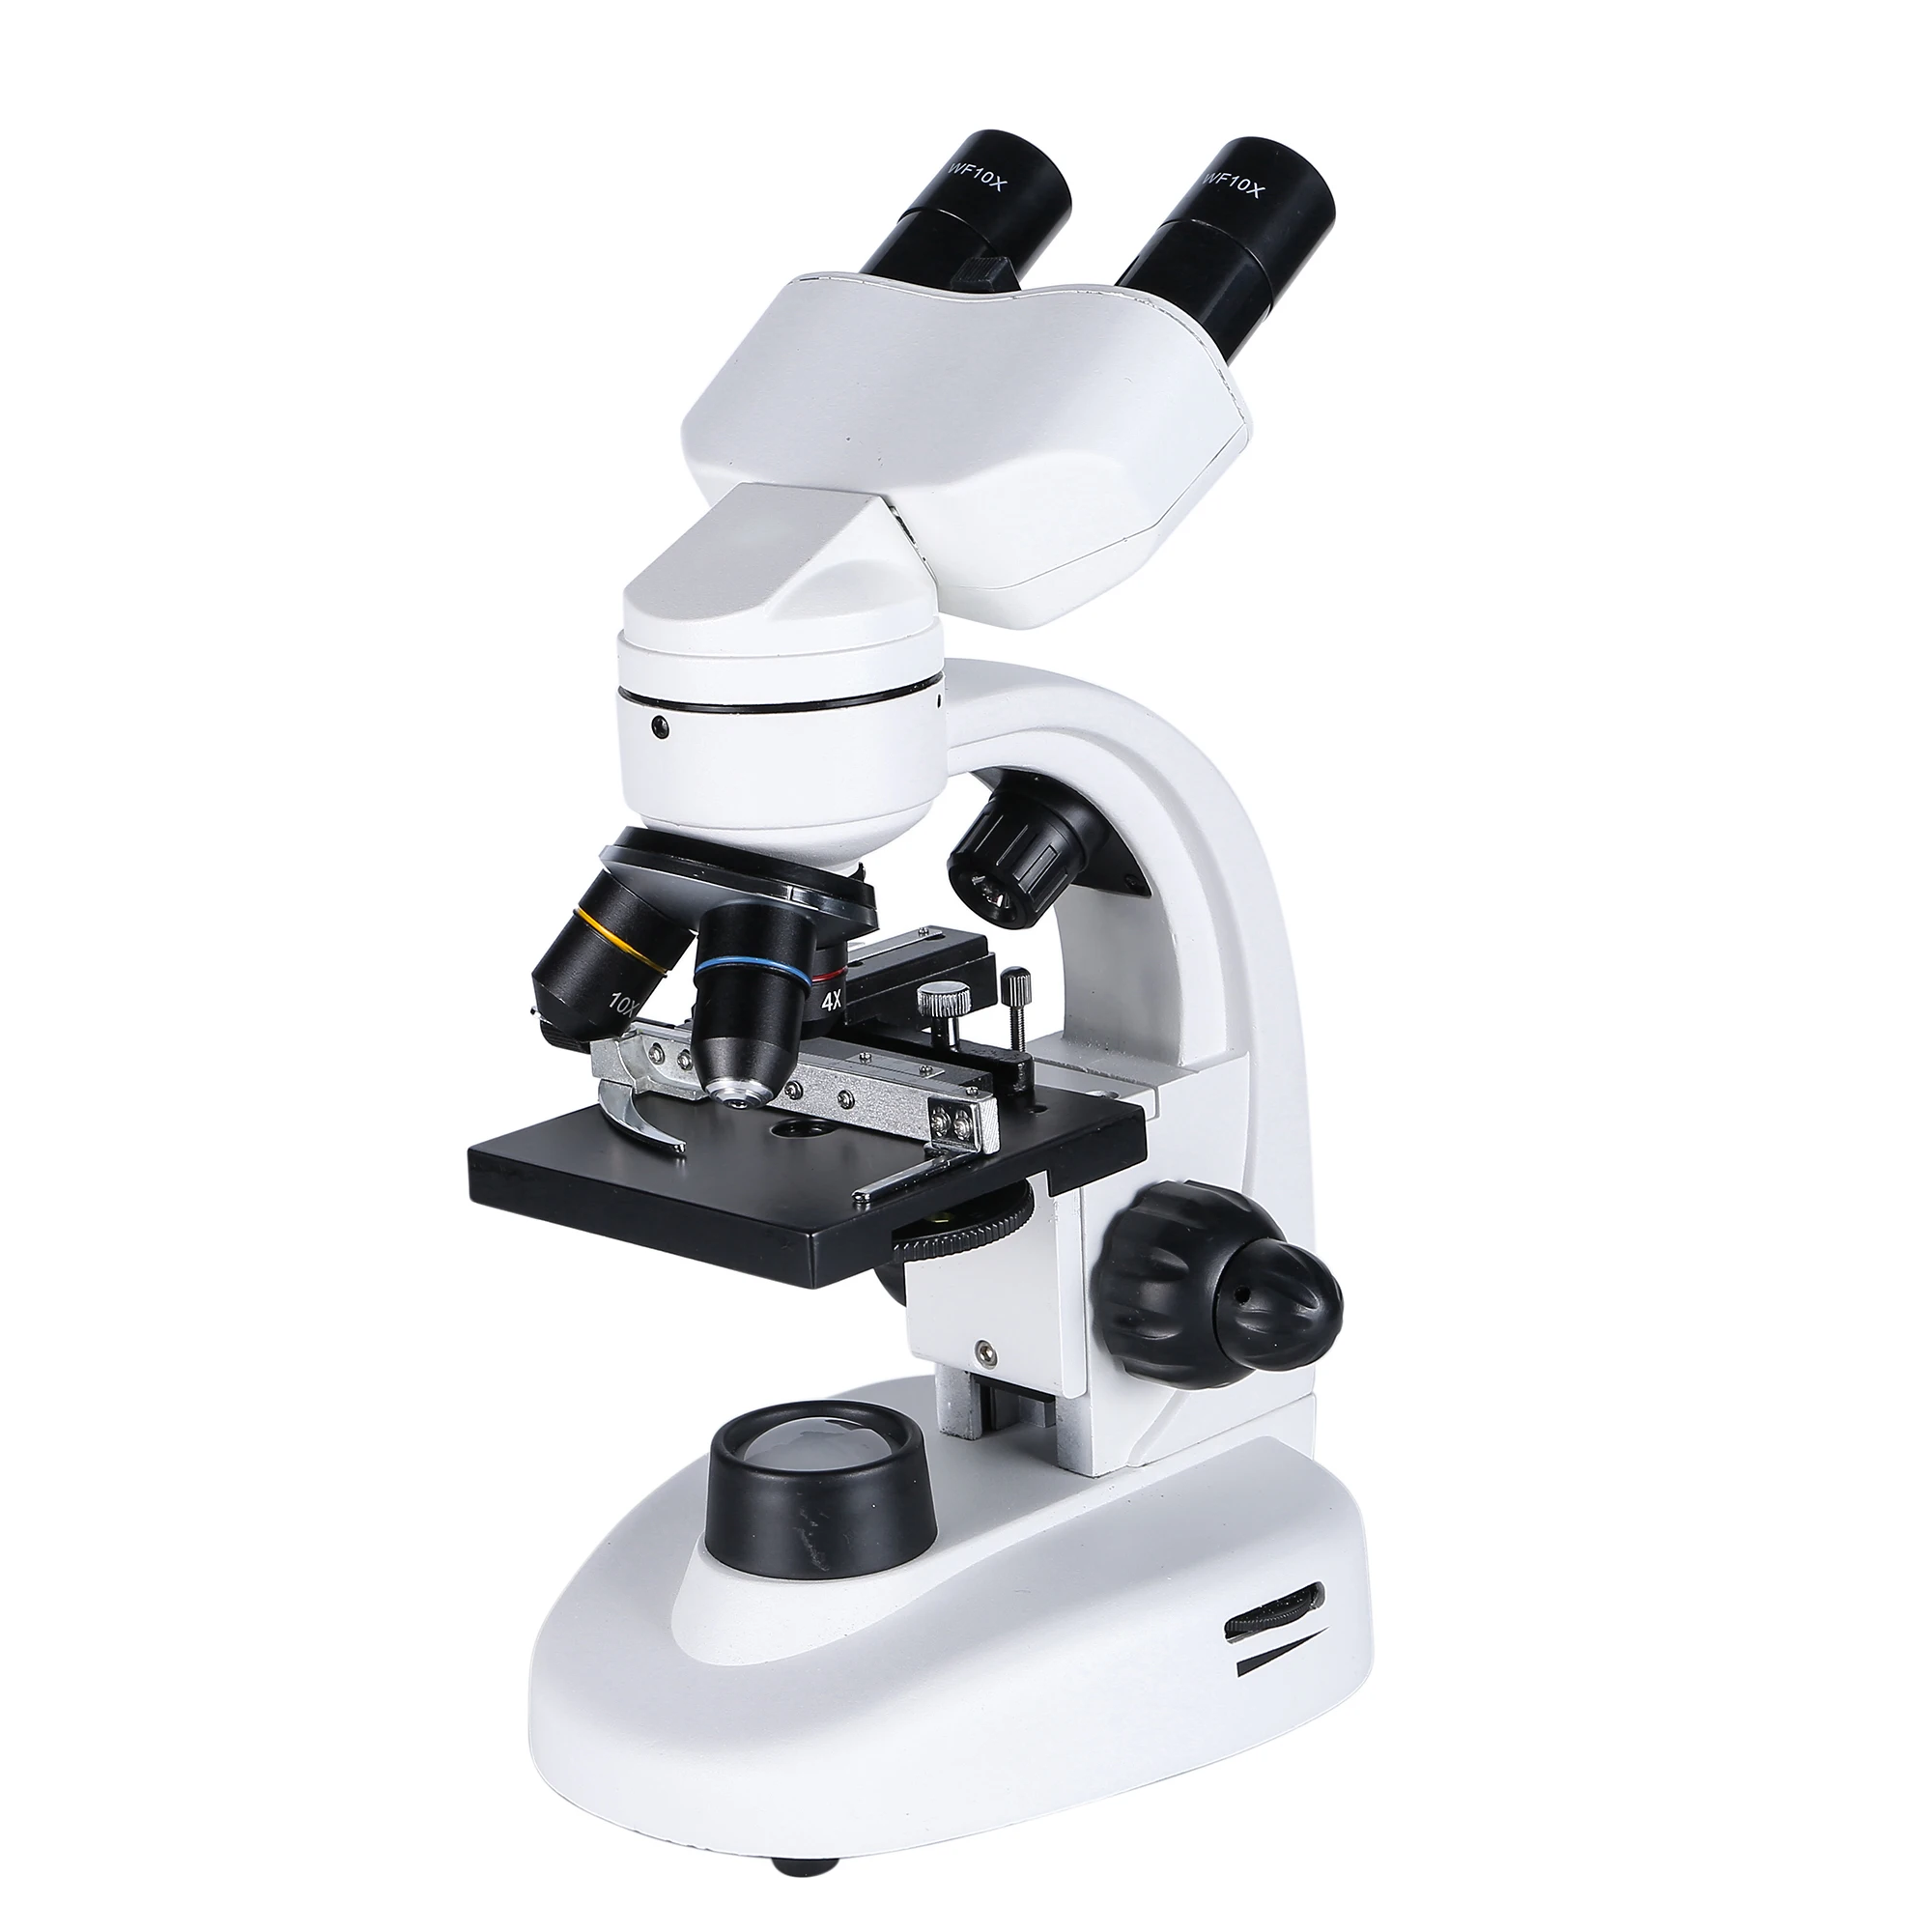 

INRE China High Quality Continuous Zooming Stereo 44-SC Microscope Cheap Price Microscope for Chemistry